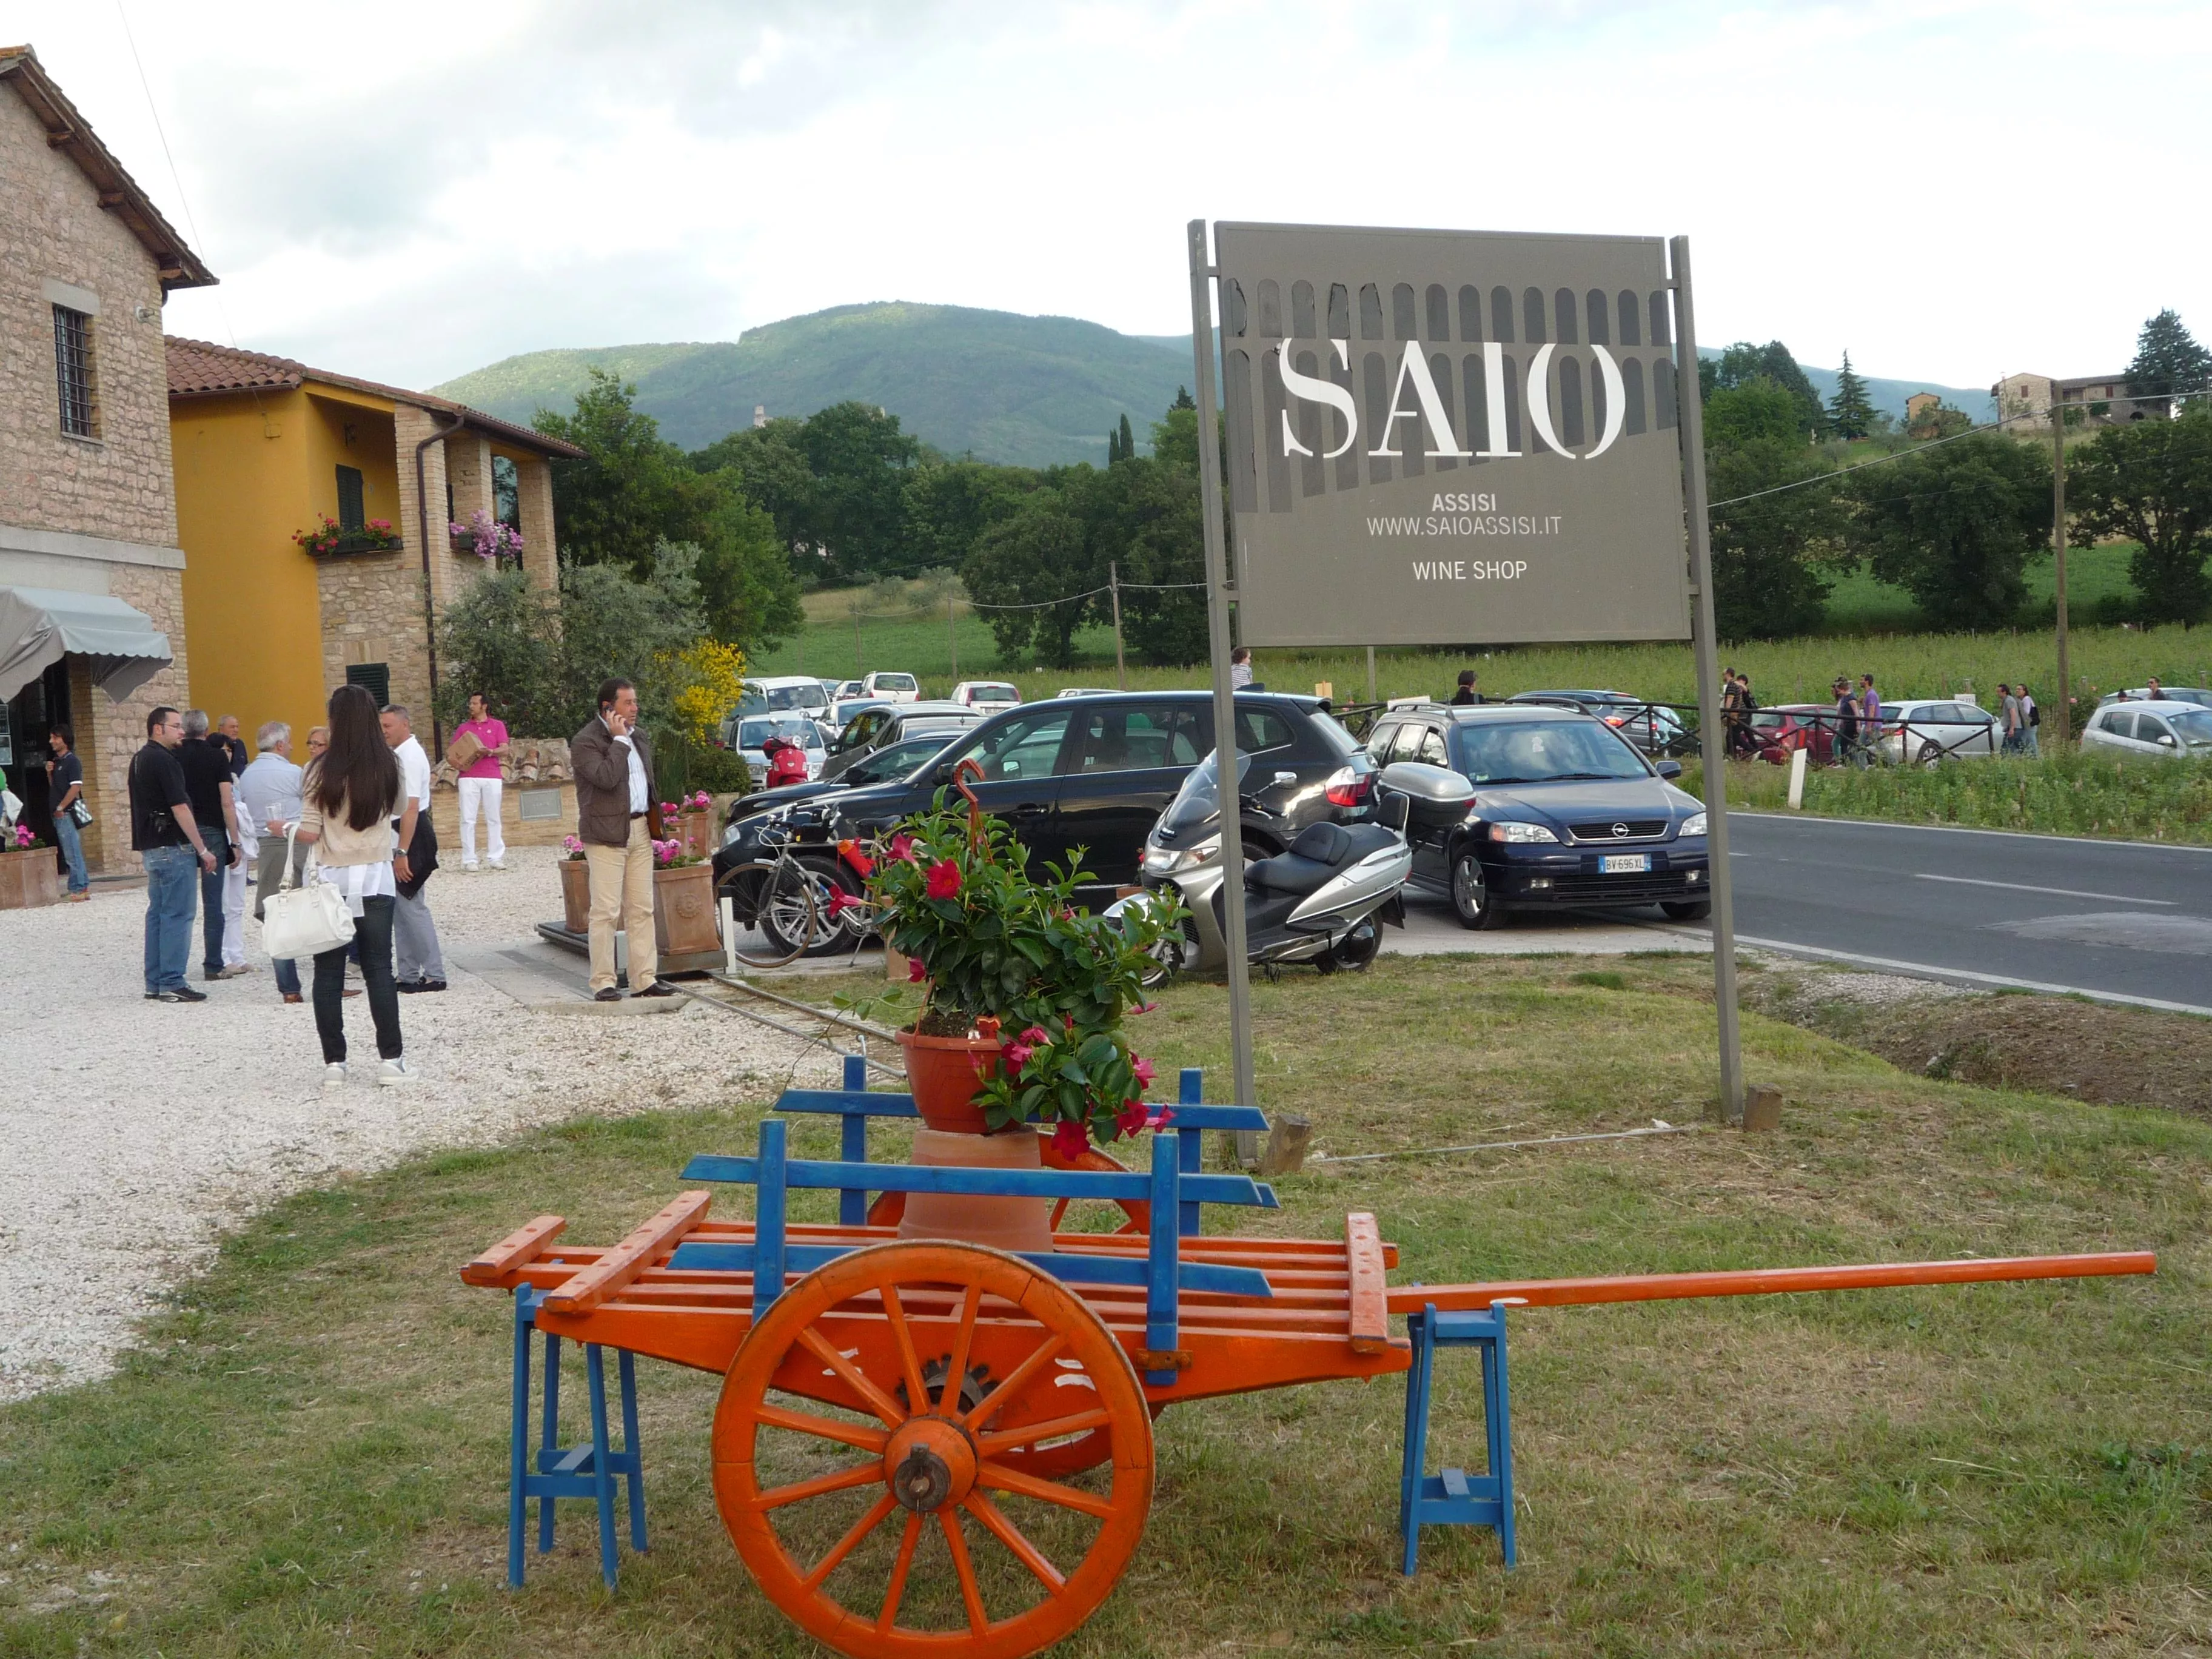 SAIO Wine Shop Agricultural Company in Italy, Europe | Wineries - Rated 3.9